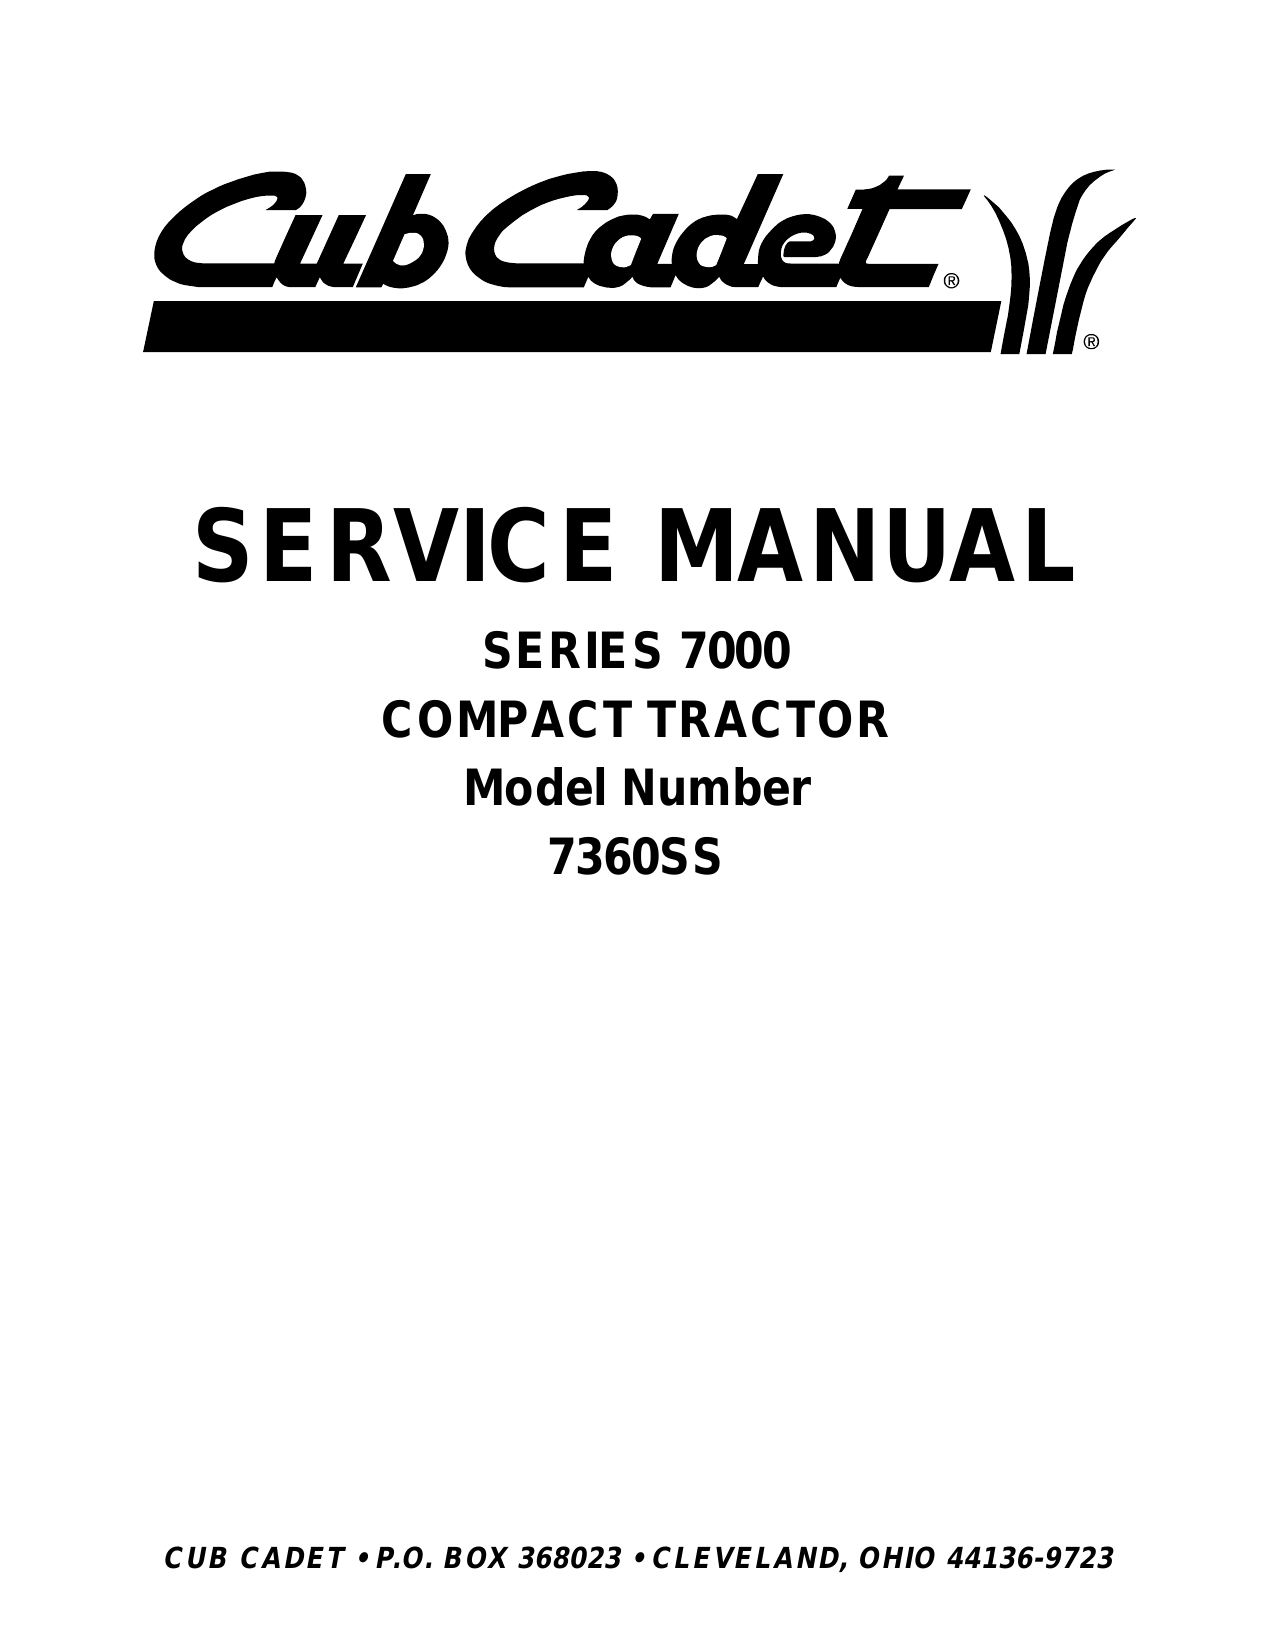 Cub Cadet 7360 SS compact tractor manual Preview image 2